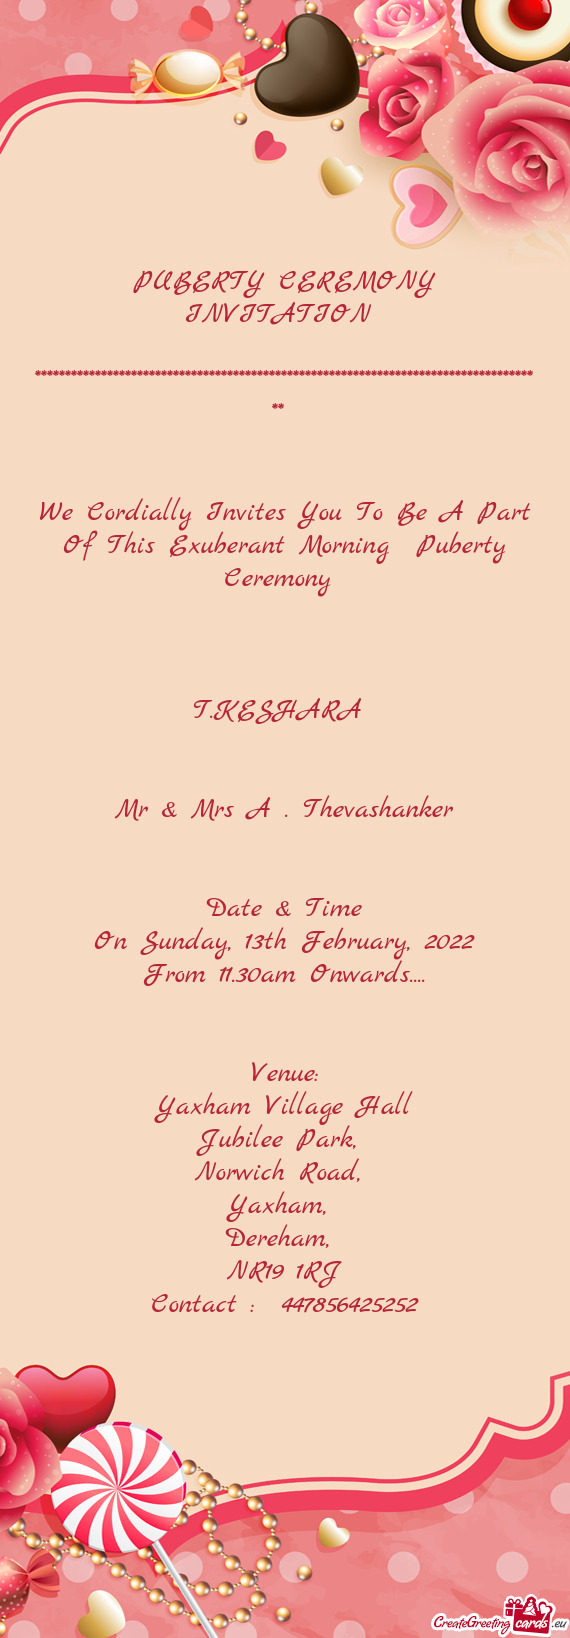 We Cordially Invites You To Be A Part Of This Exuberant Morning Puberty Ceremony